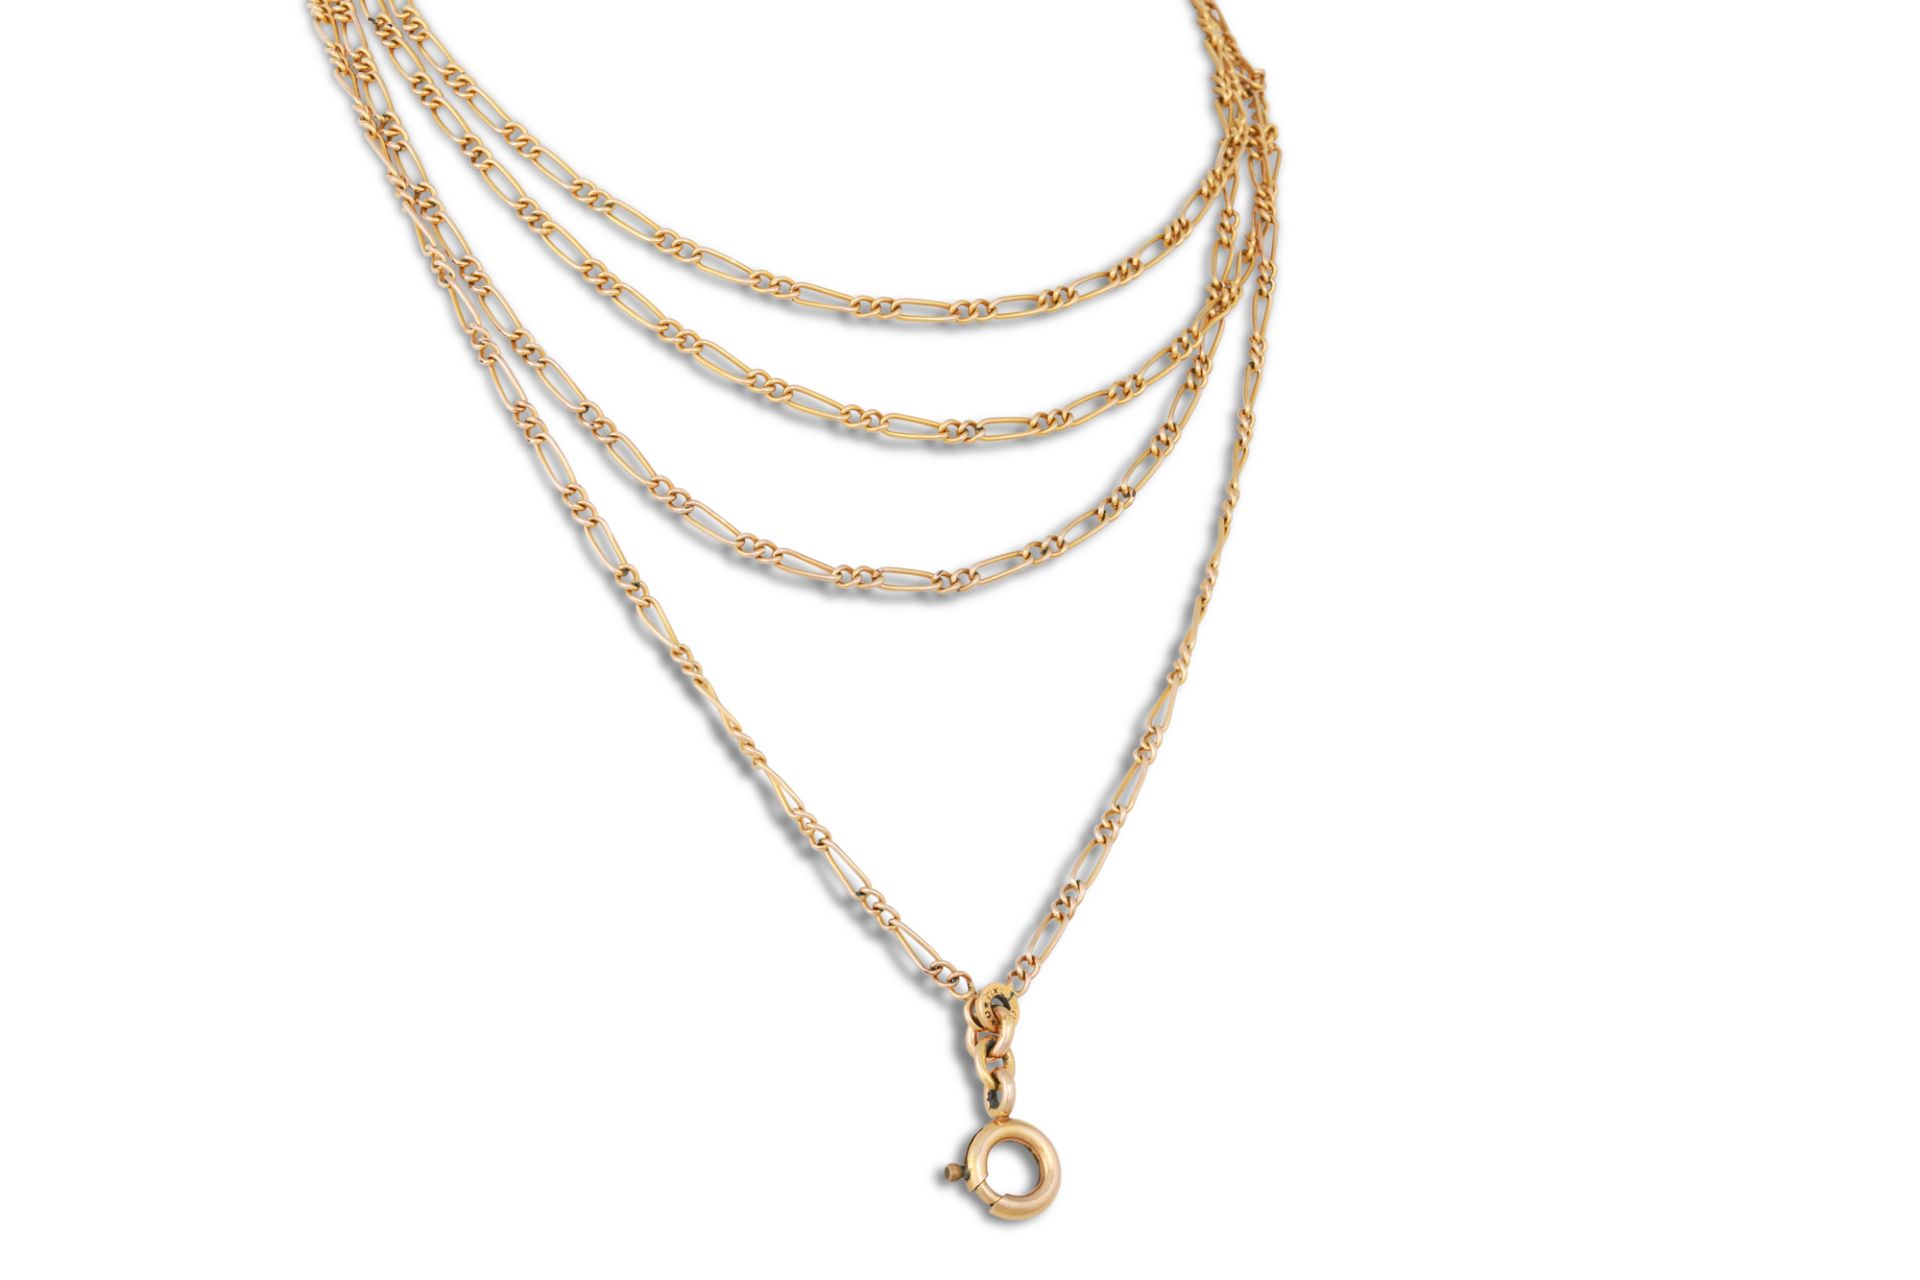 A VINTAGE GOLD FANCY LINK NECK CHAIN, 11.7 g. (tests 18ct)